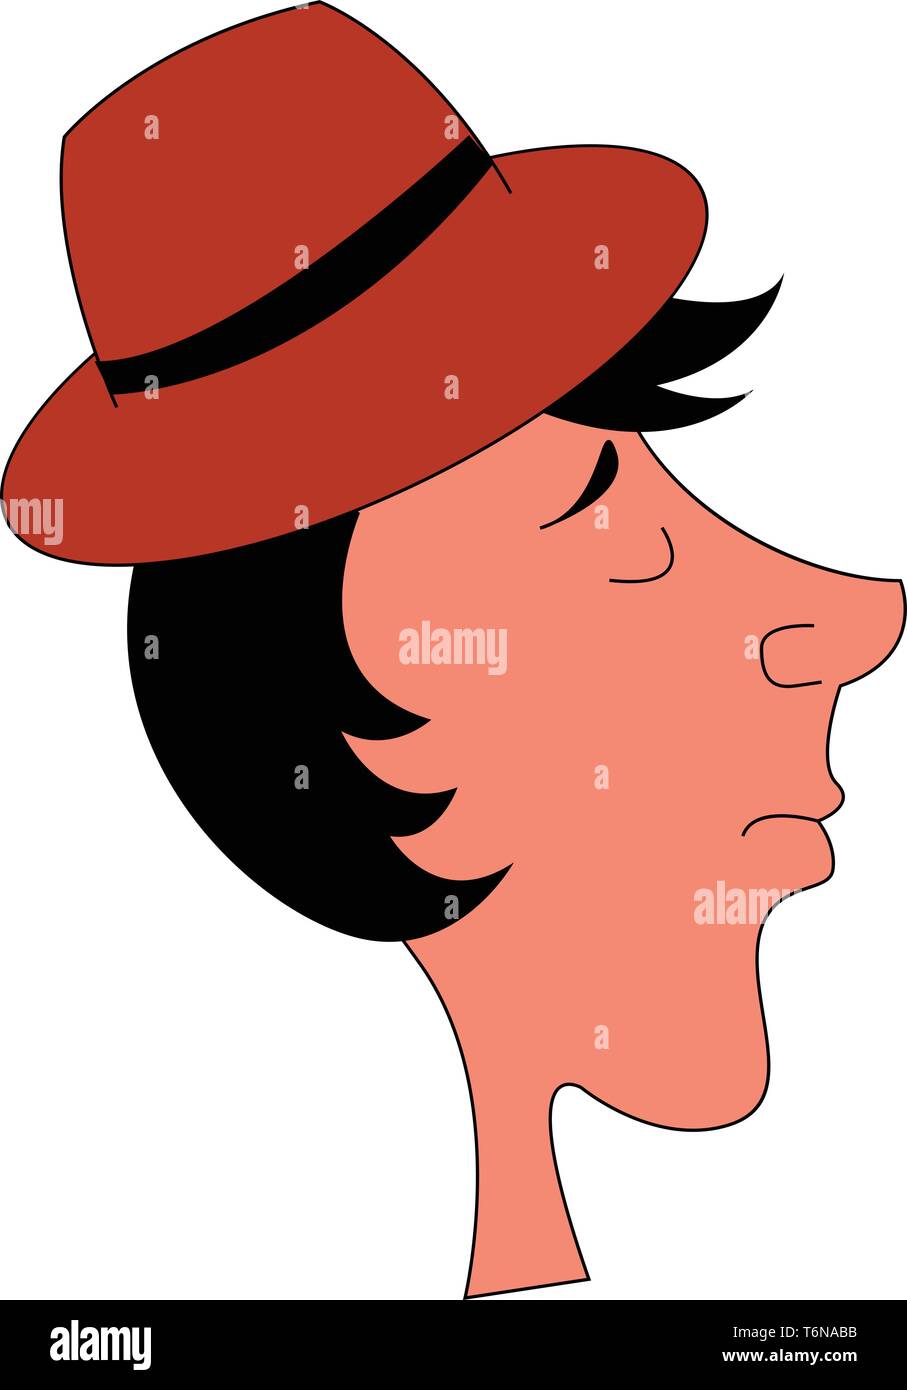 Profile for a fair guy in black hair wearing red hat vector color drawing or illustration Stock Vector